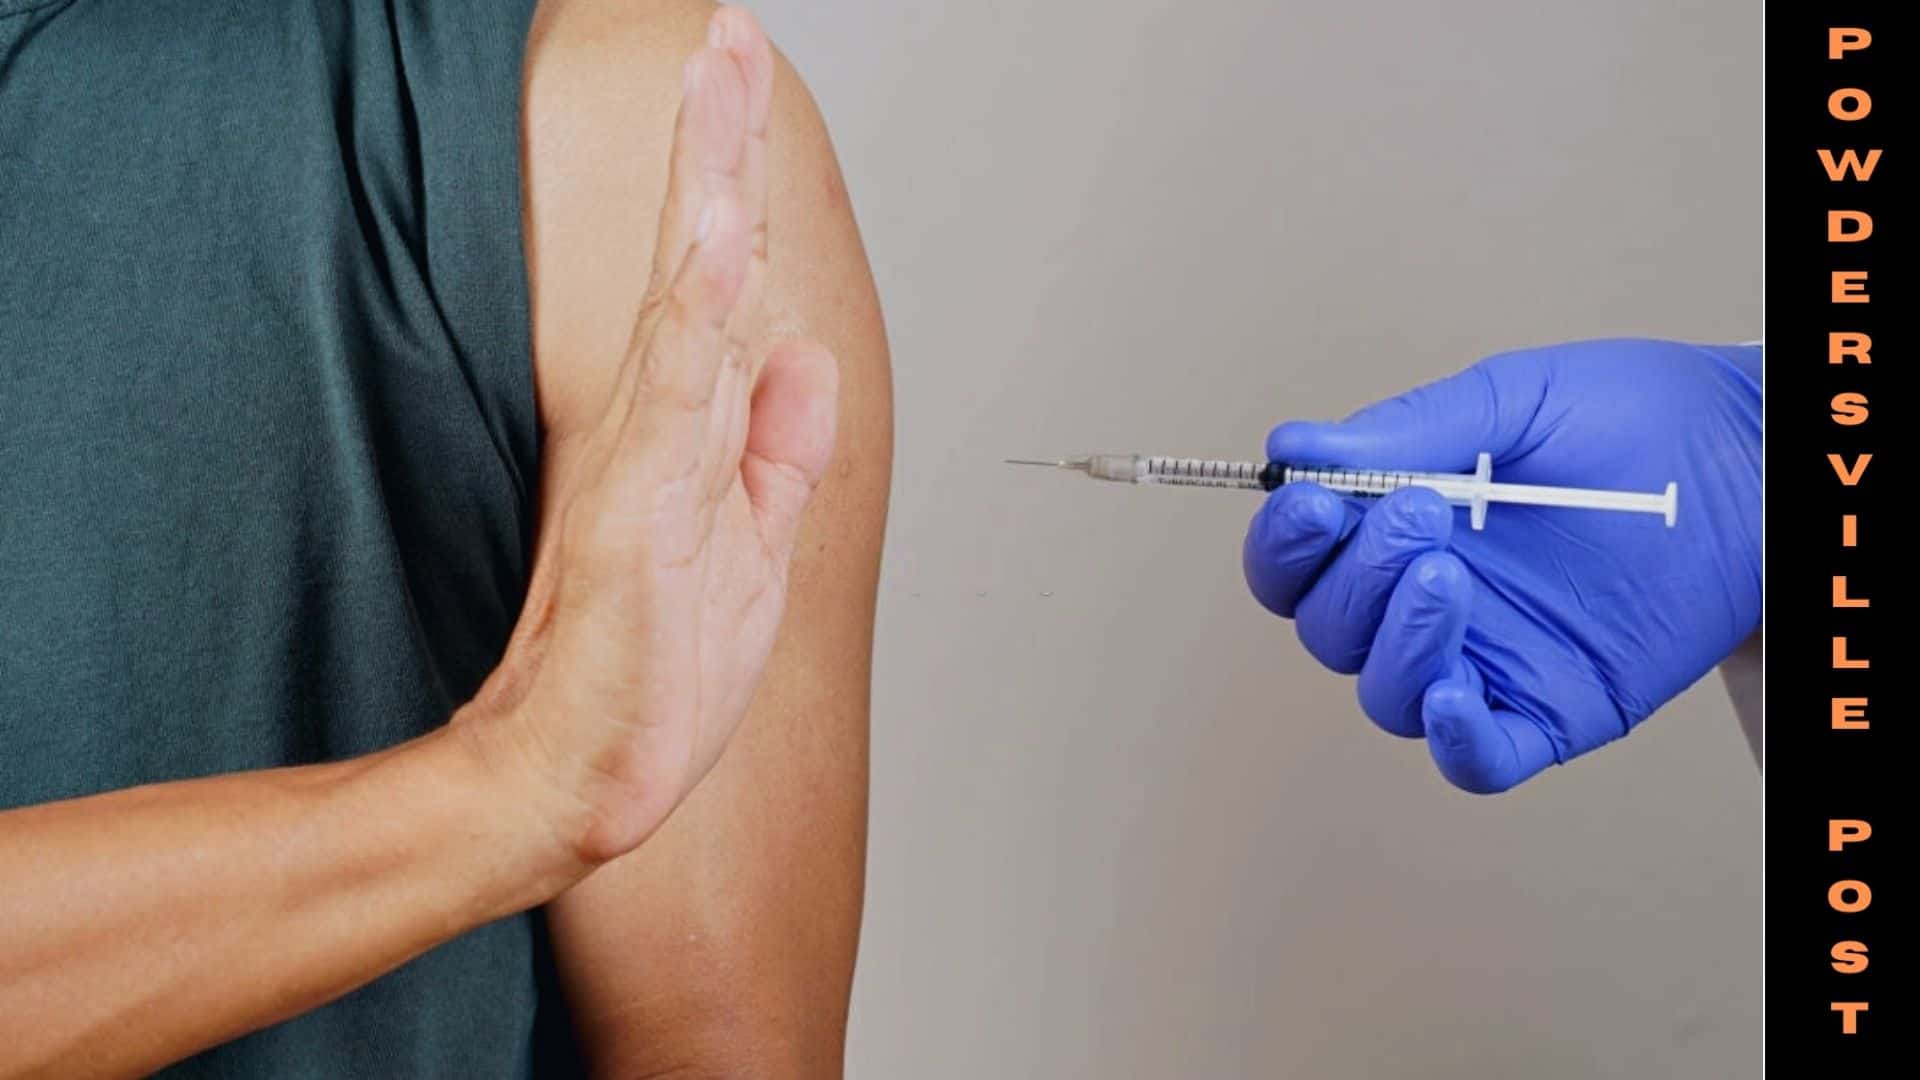 There Are Still People Who Are Not Ready To Get Vaccinated